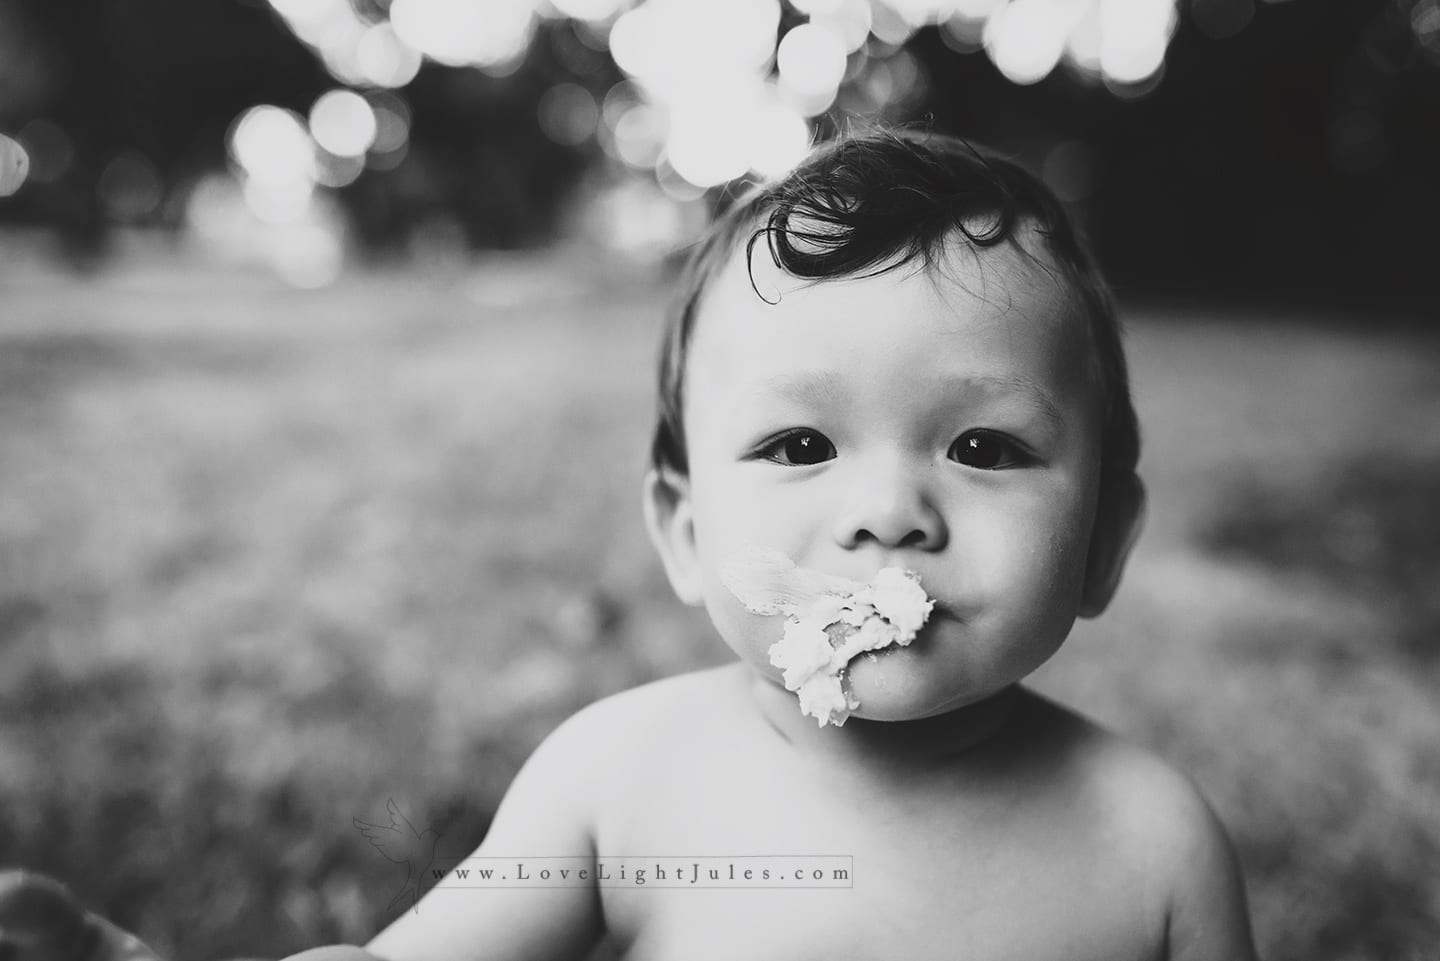 image-of-boy-from-outdoor-cake-smash-photo-session-in-sacramento